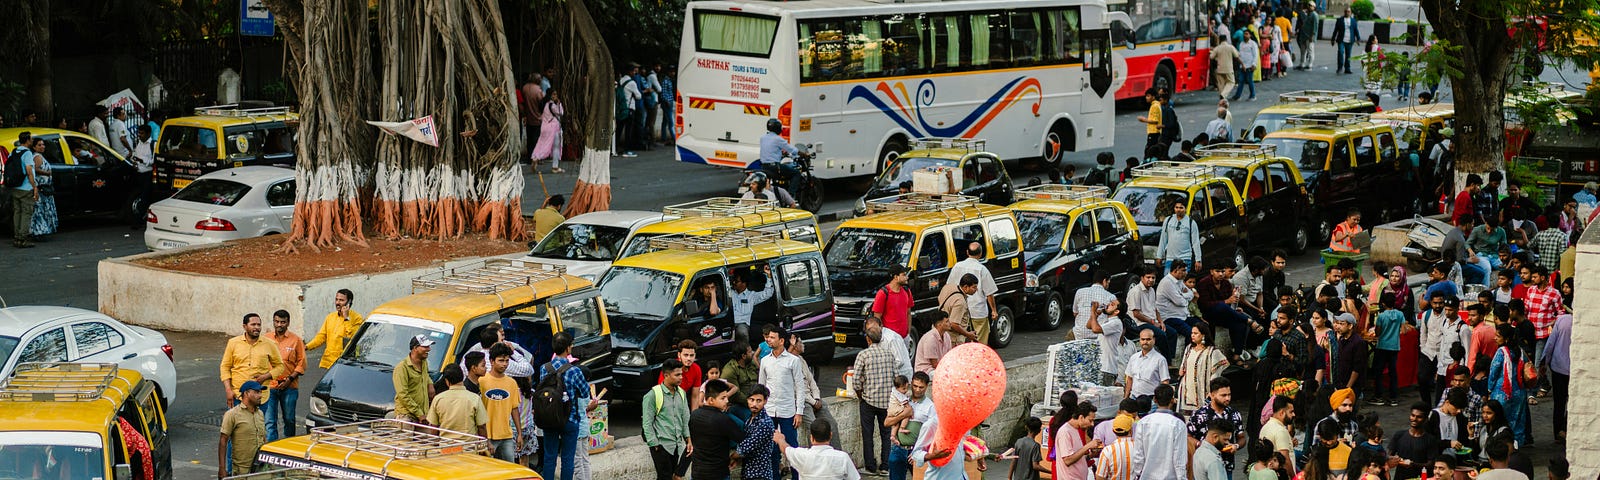 Bustling Mumbai city with traffic — cabs, buses and people milling around